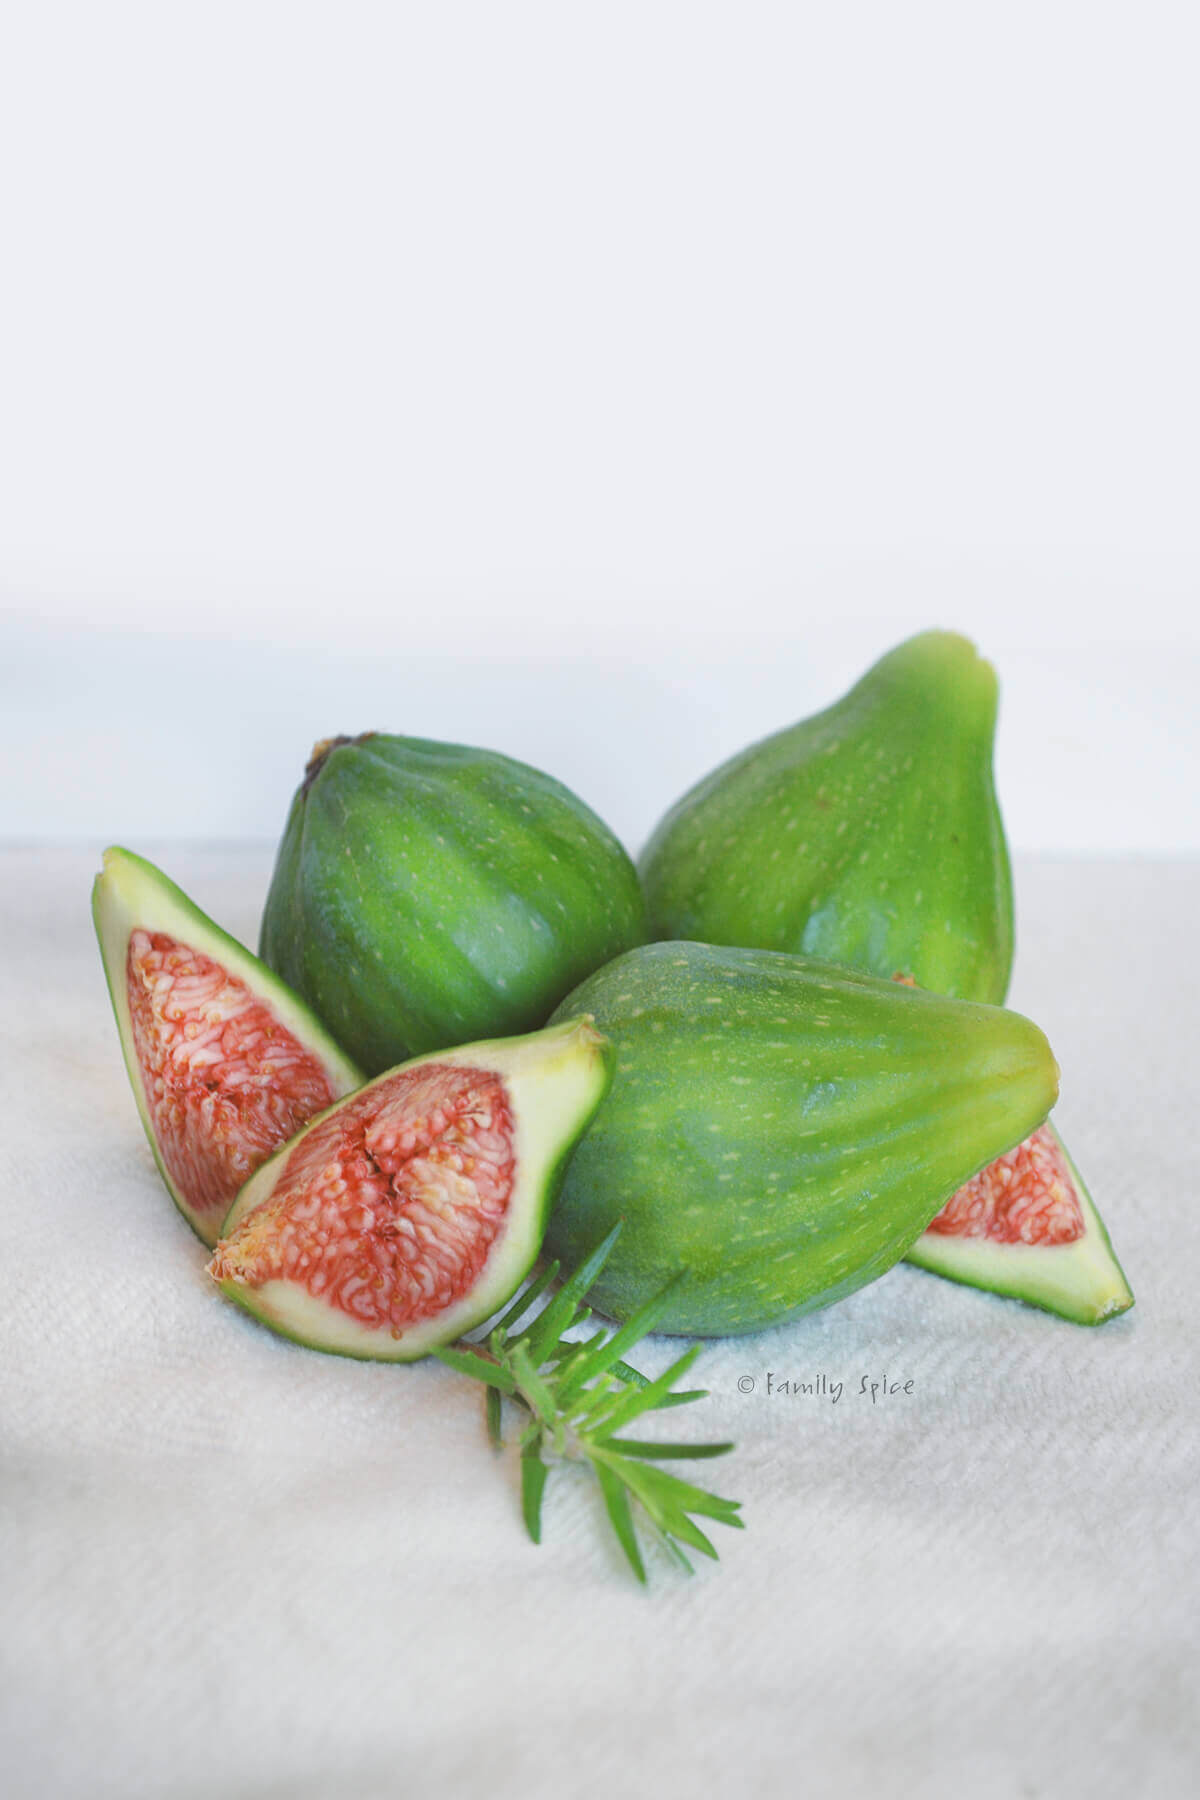 Several fresh green figs with one quartered on a white background